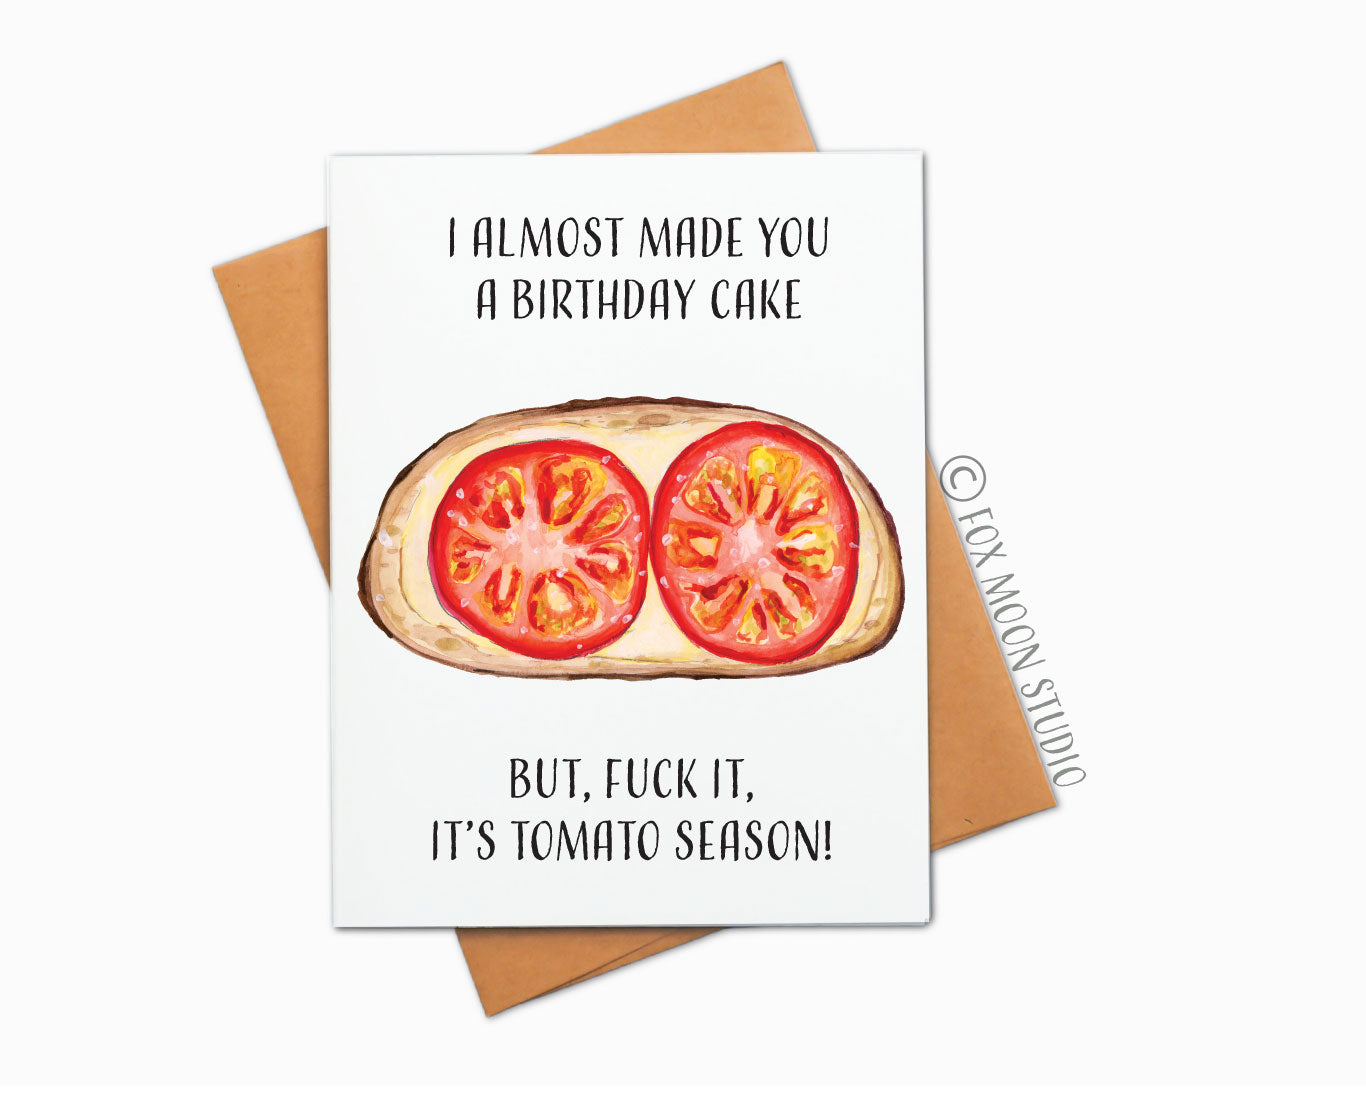 I Almost Made You A Birthday Cake. But, Fuck It, It's Tomato Season! - Foodie Humor Birthday Greeting Card